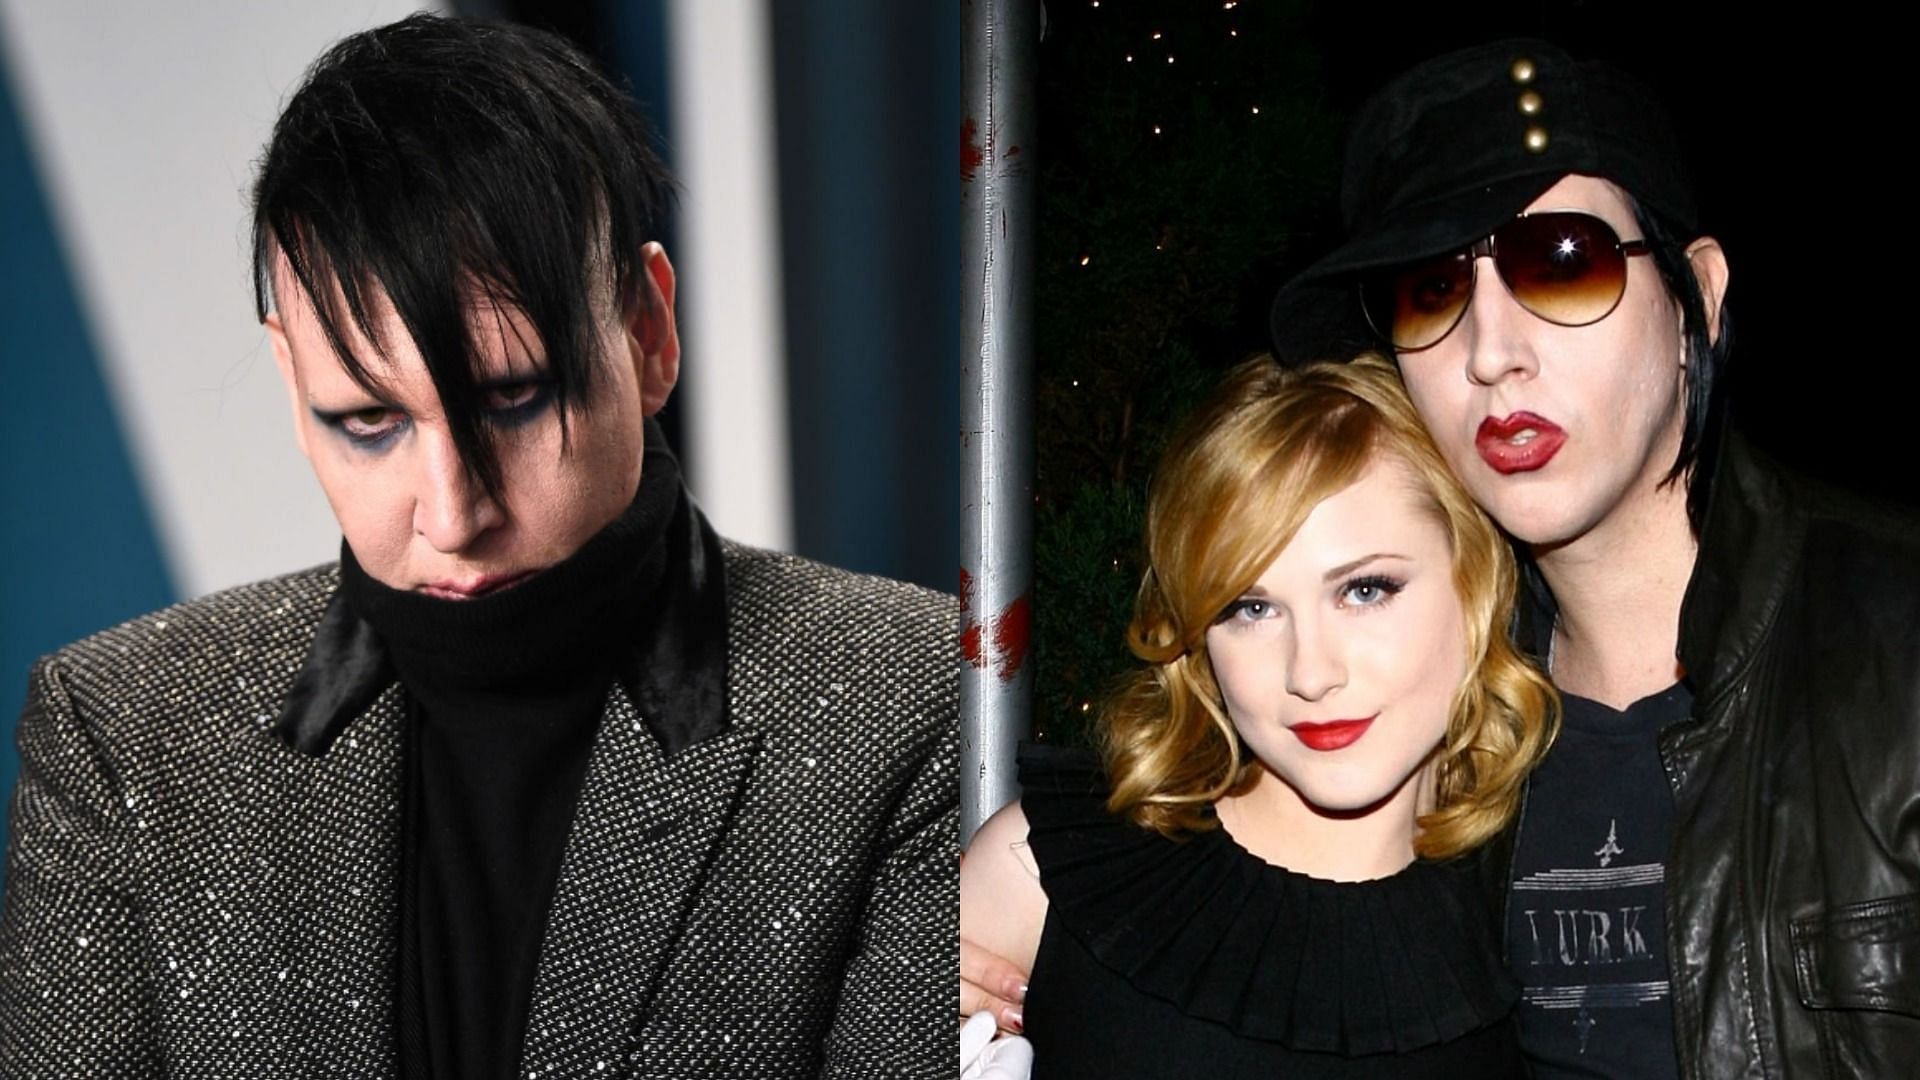 Marilyn Manson has filed a defamation lawsuit against ex-fiancee Evan Rachel Wood (Image via Karwai Tang/Getty Images and Scott Wintrow/Getty Images)